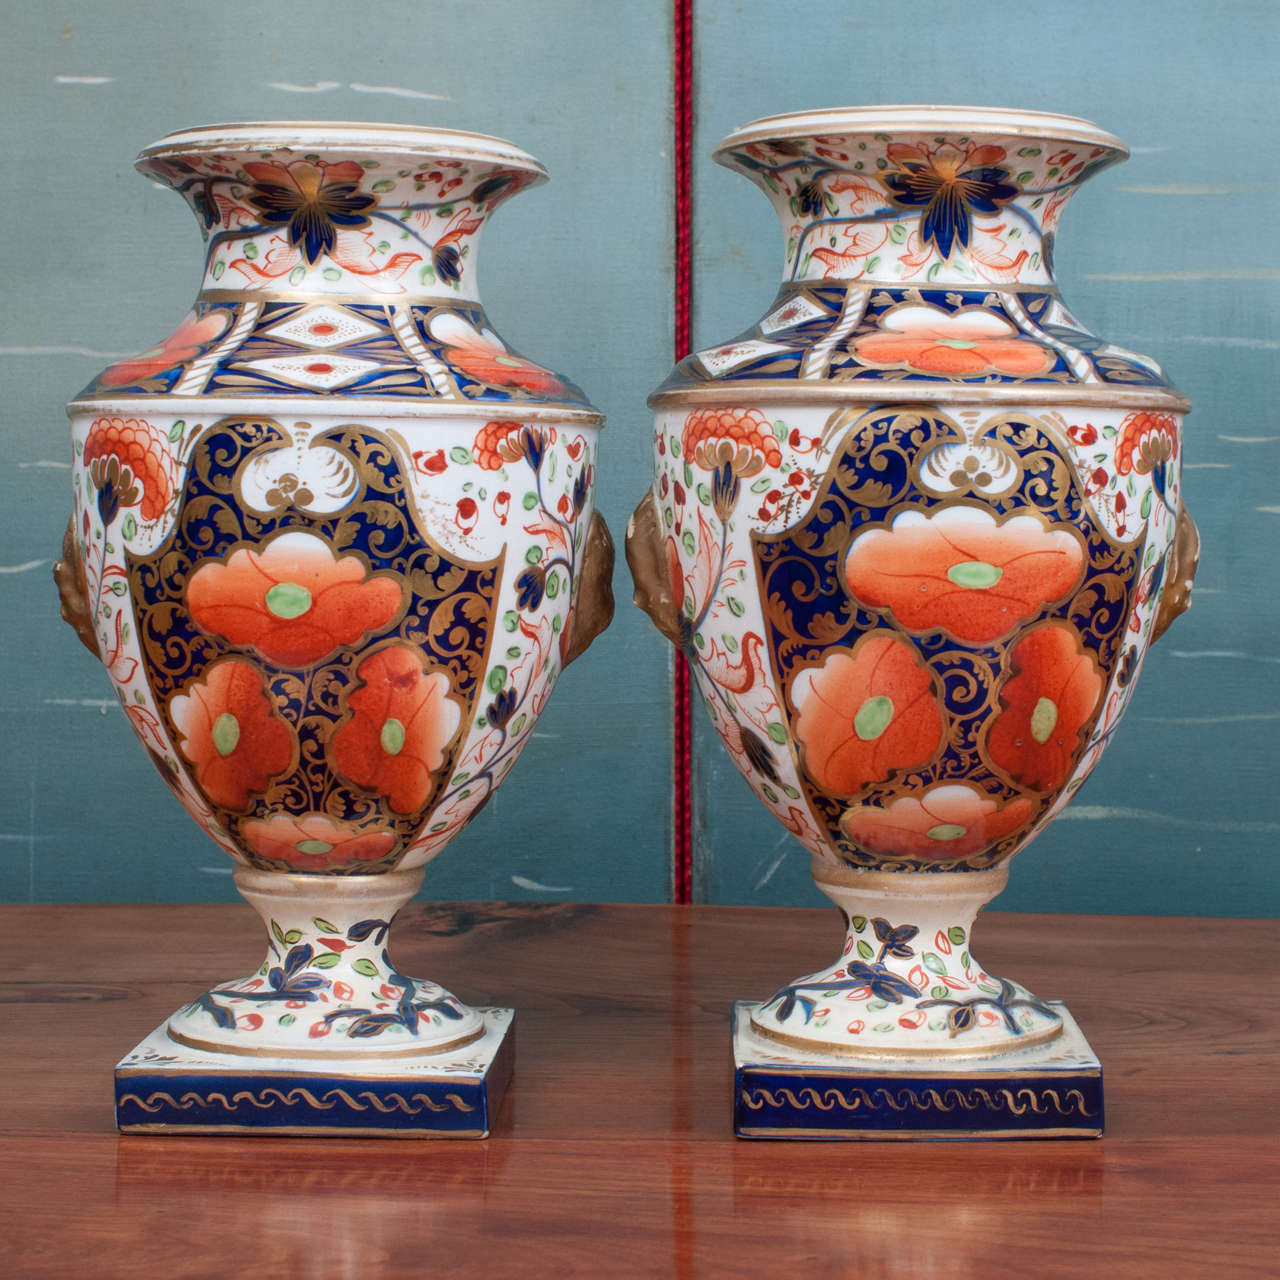 Pair of Derby Porcelain Urns in the 